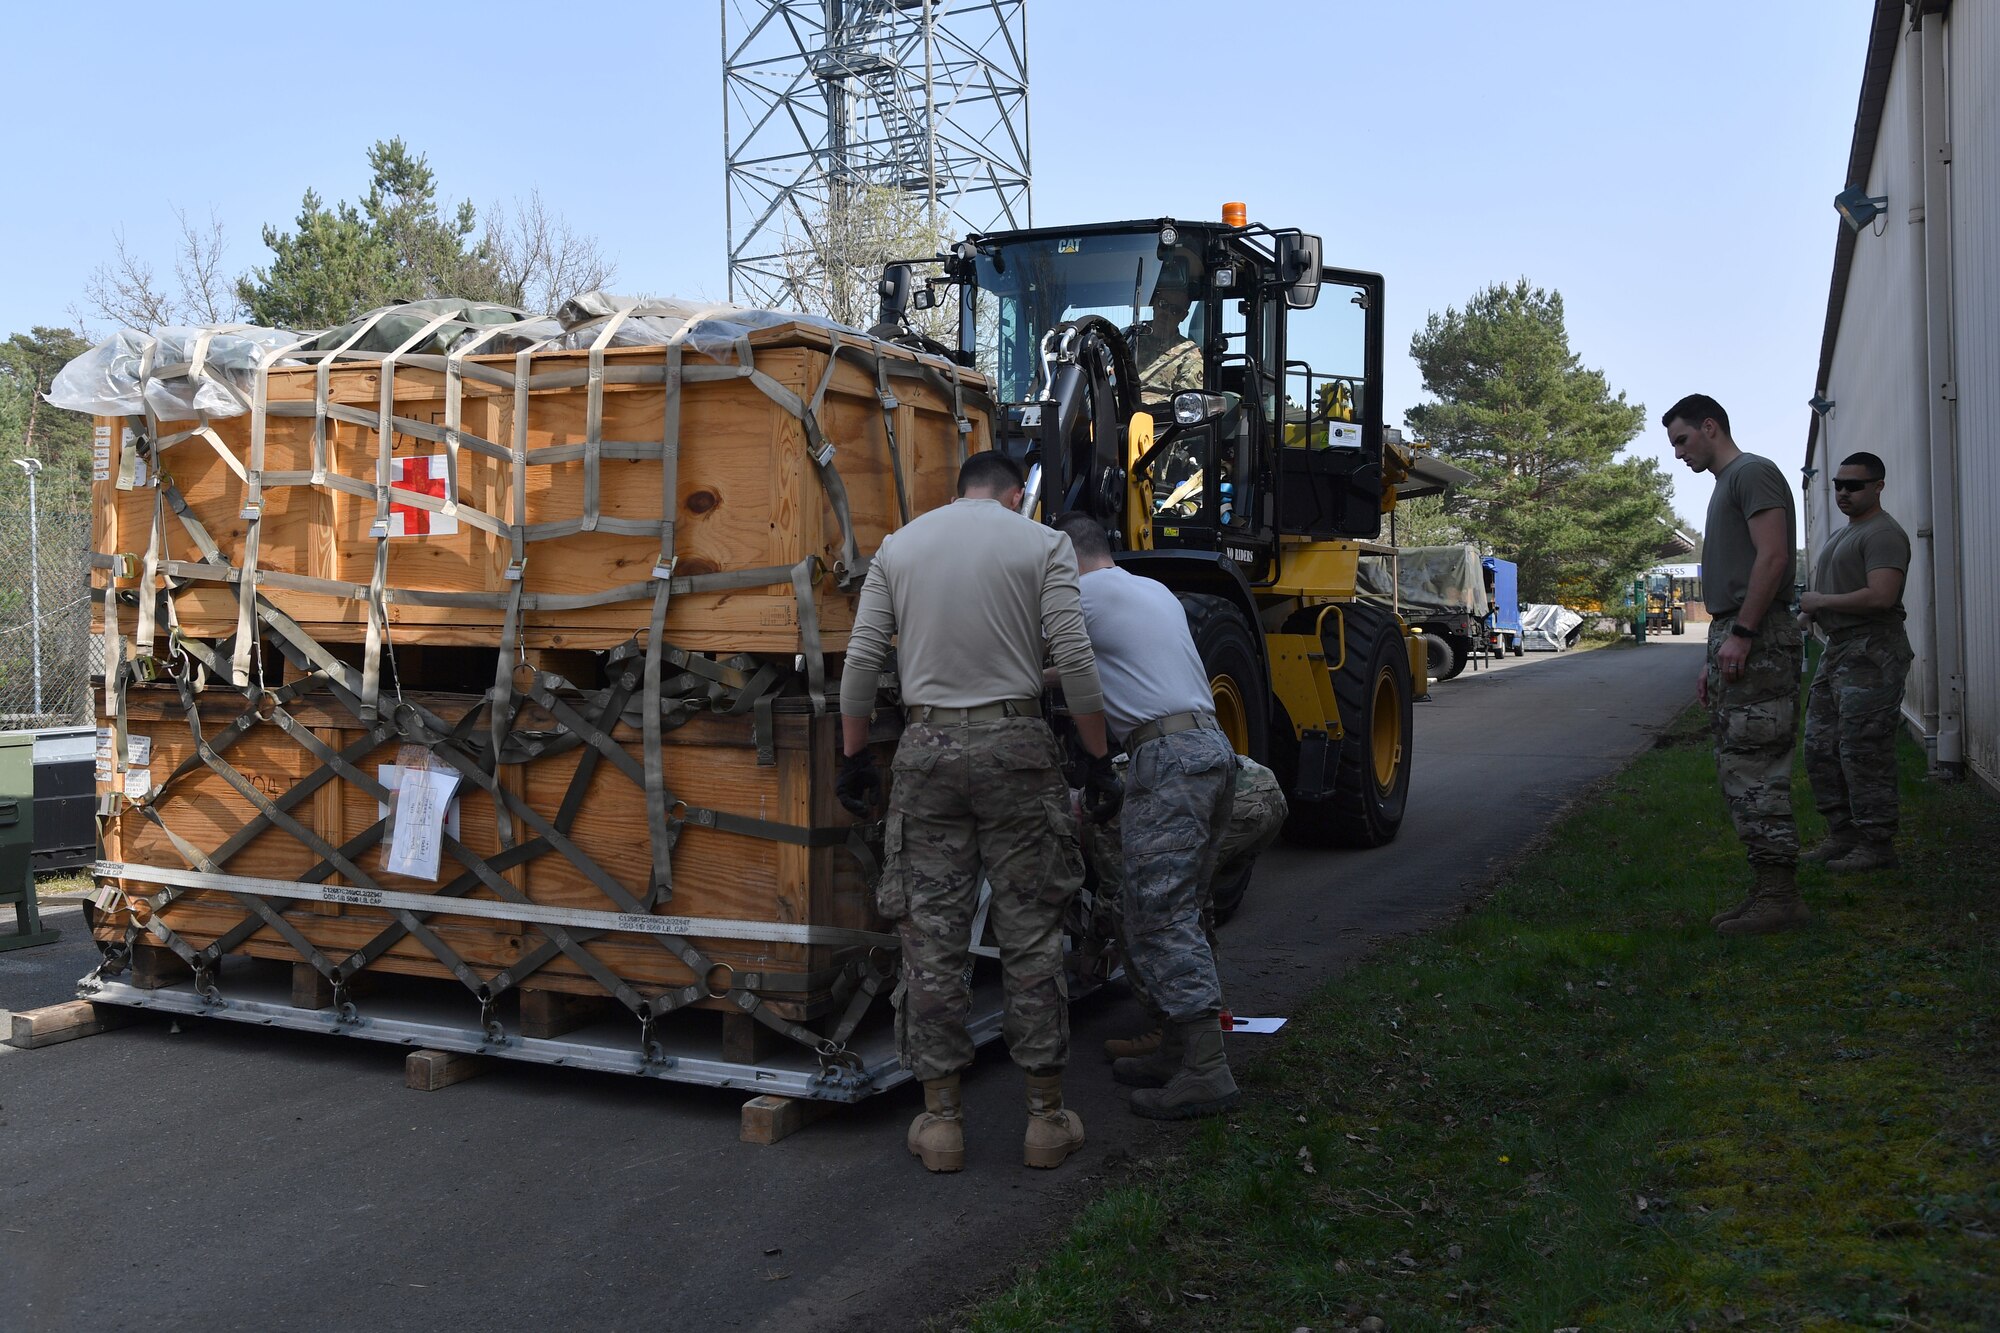 Airmen secure a pallet of medical supplies to a forklift.